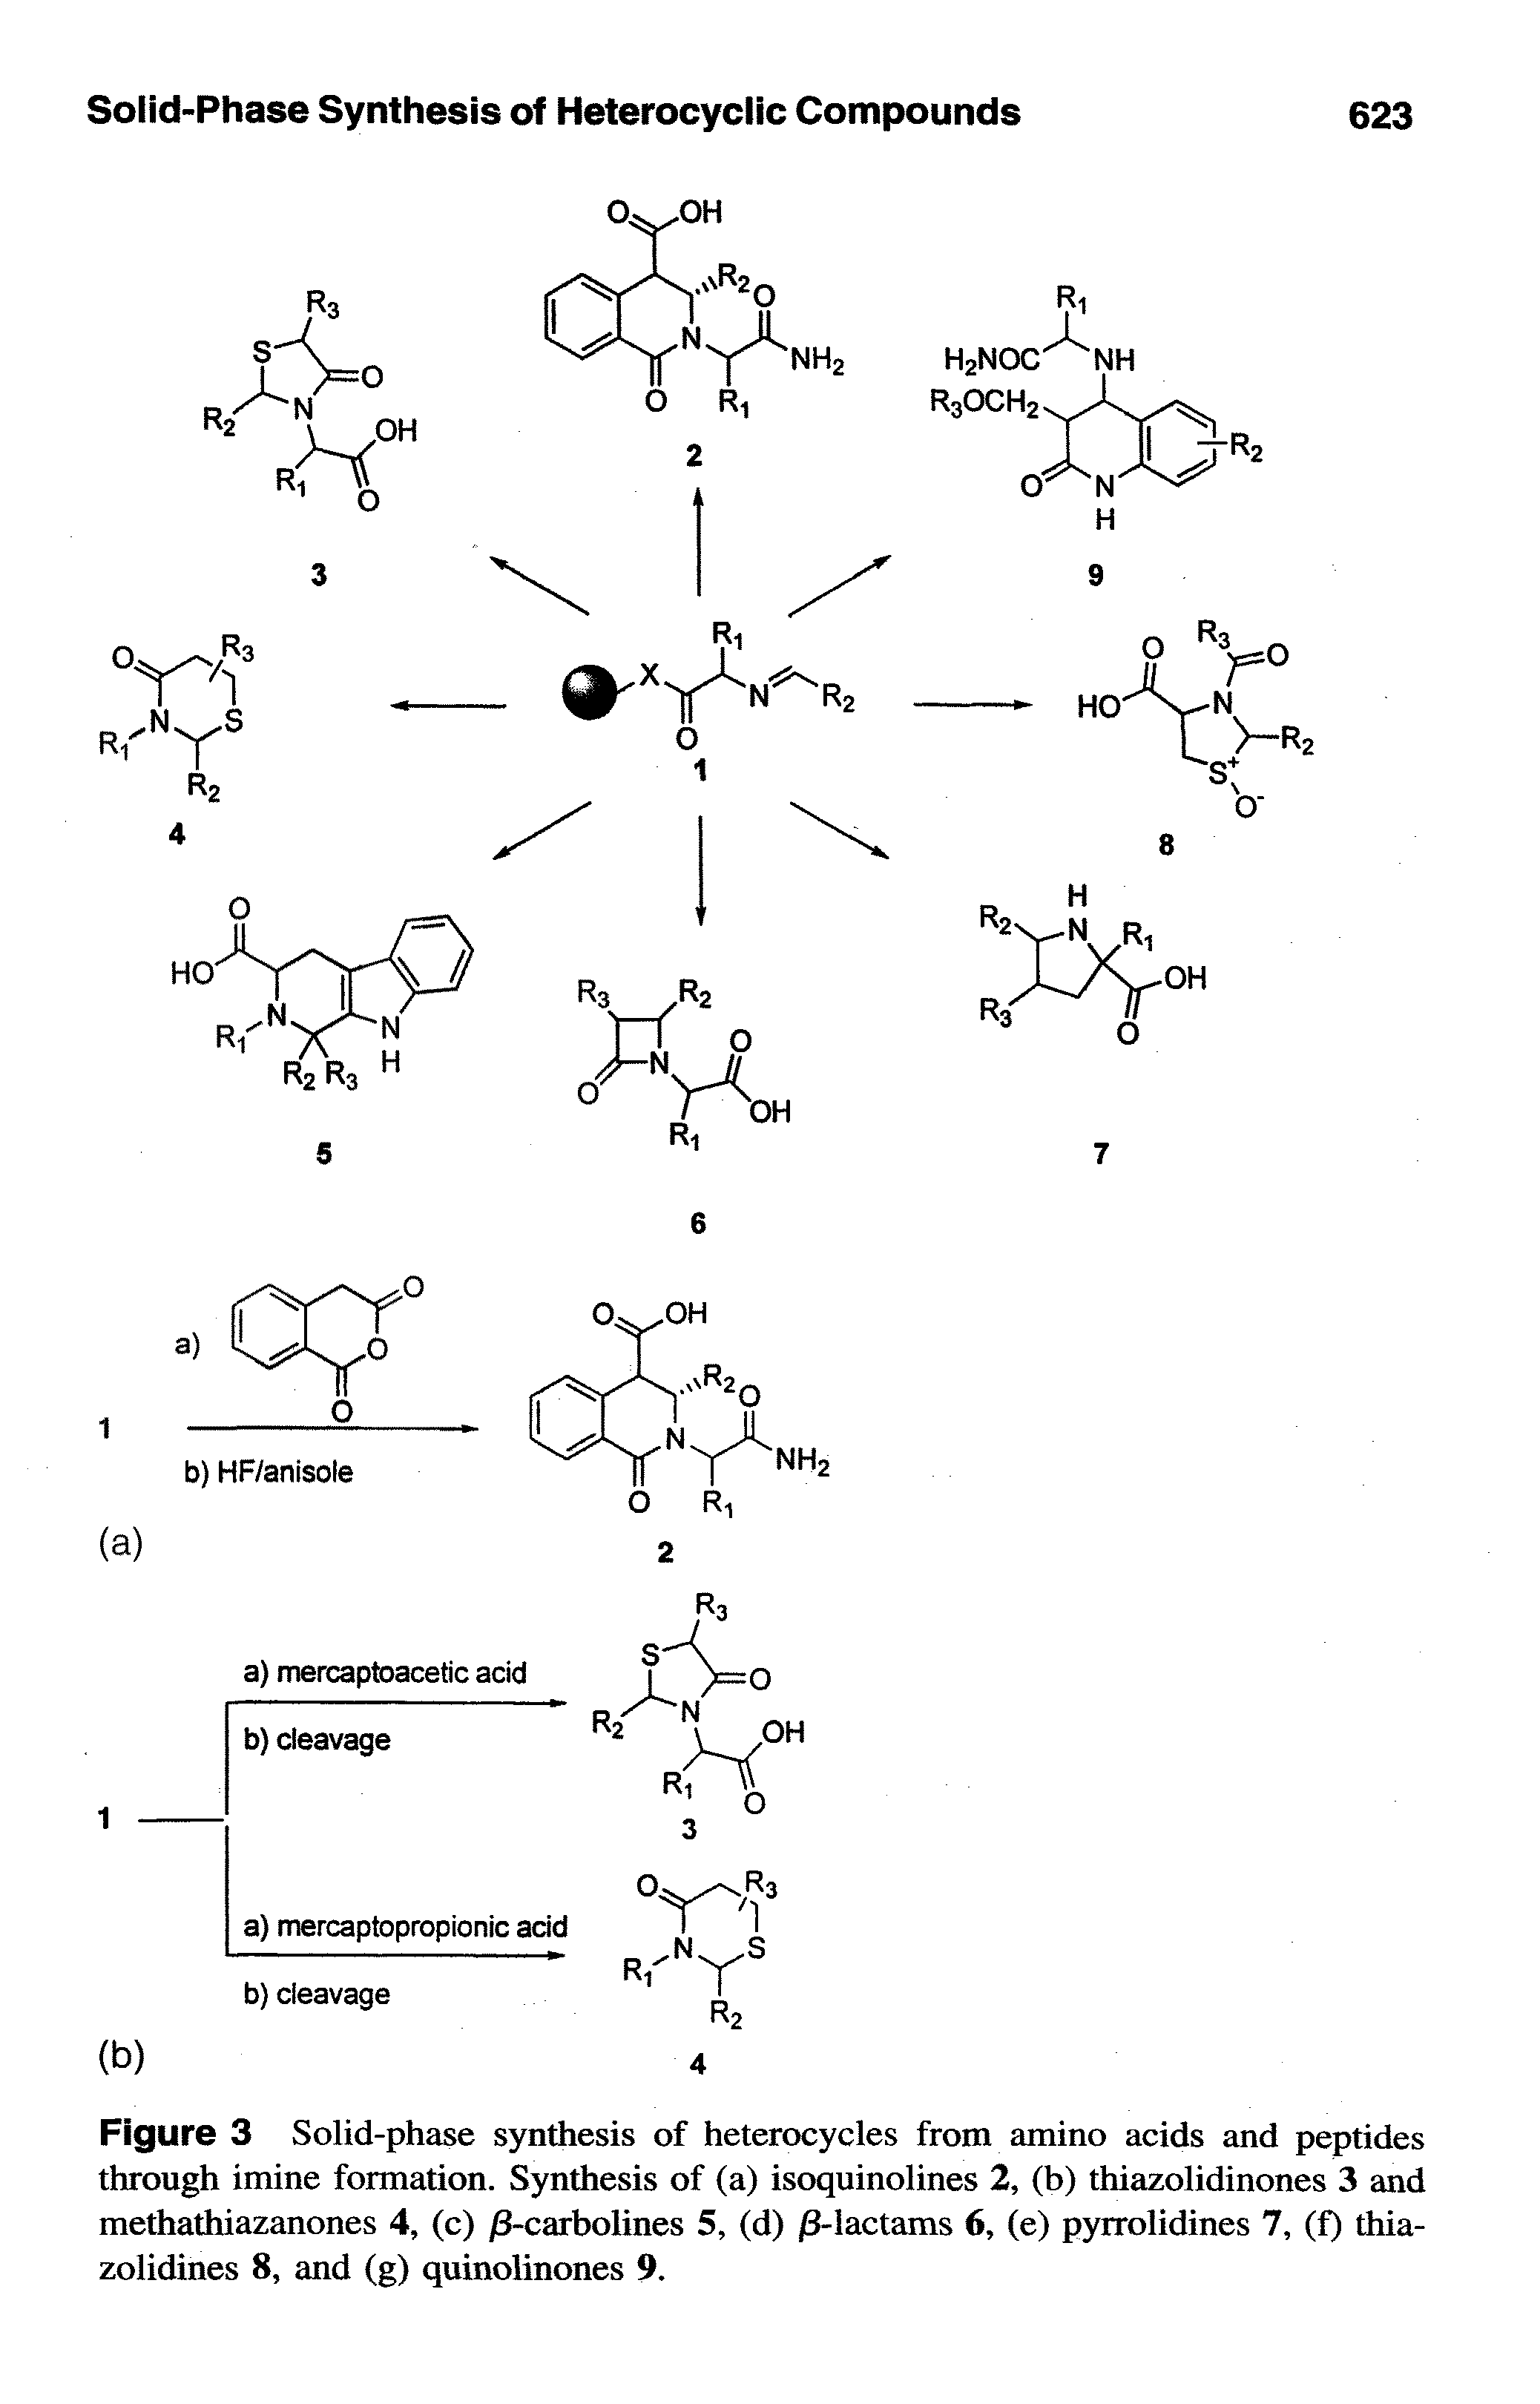 Figure 3 Solid-ph e synthesis of heterocycles from amino acids and peptides through imine formation. Synthesis of (a) isoquinolines 2, (b) thiazolidinones 3 and methathiazanones 4, (c) j8-carbolines 5, (d) -lactams 6, (e) pyrrolidines 7, (f) thia-zolidines 8, and (g) quinolinones 9.